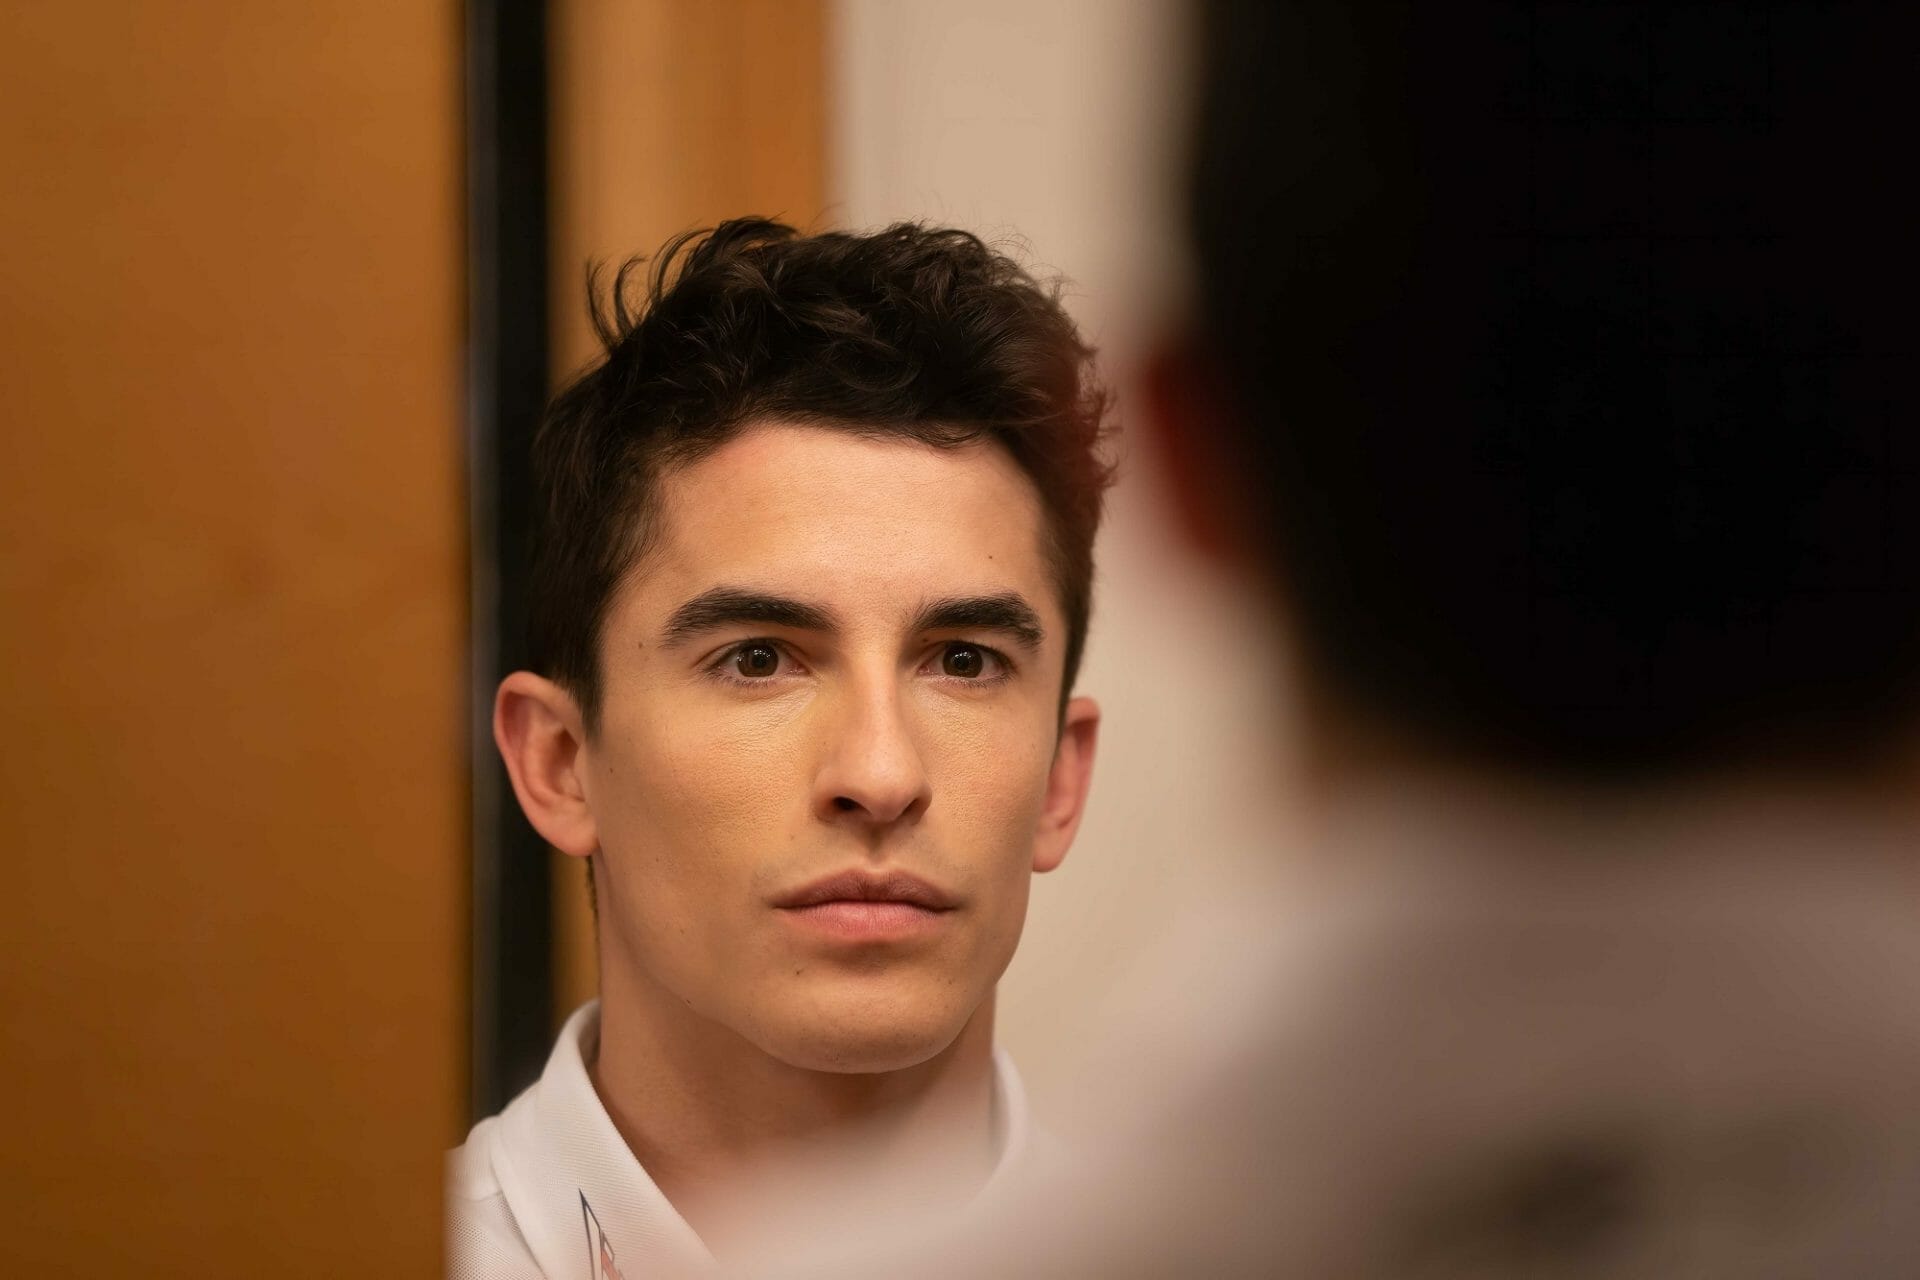 Marc Marquez ALL IN – documentary planned for early 2023